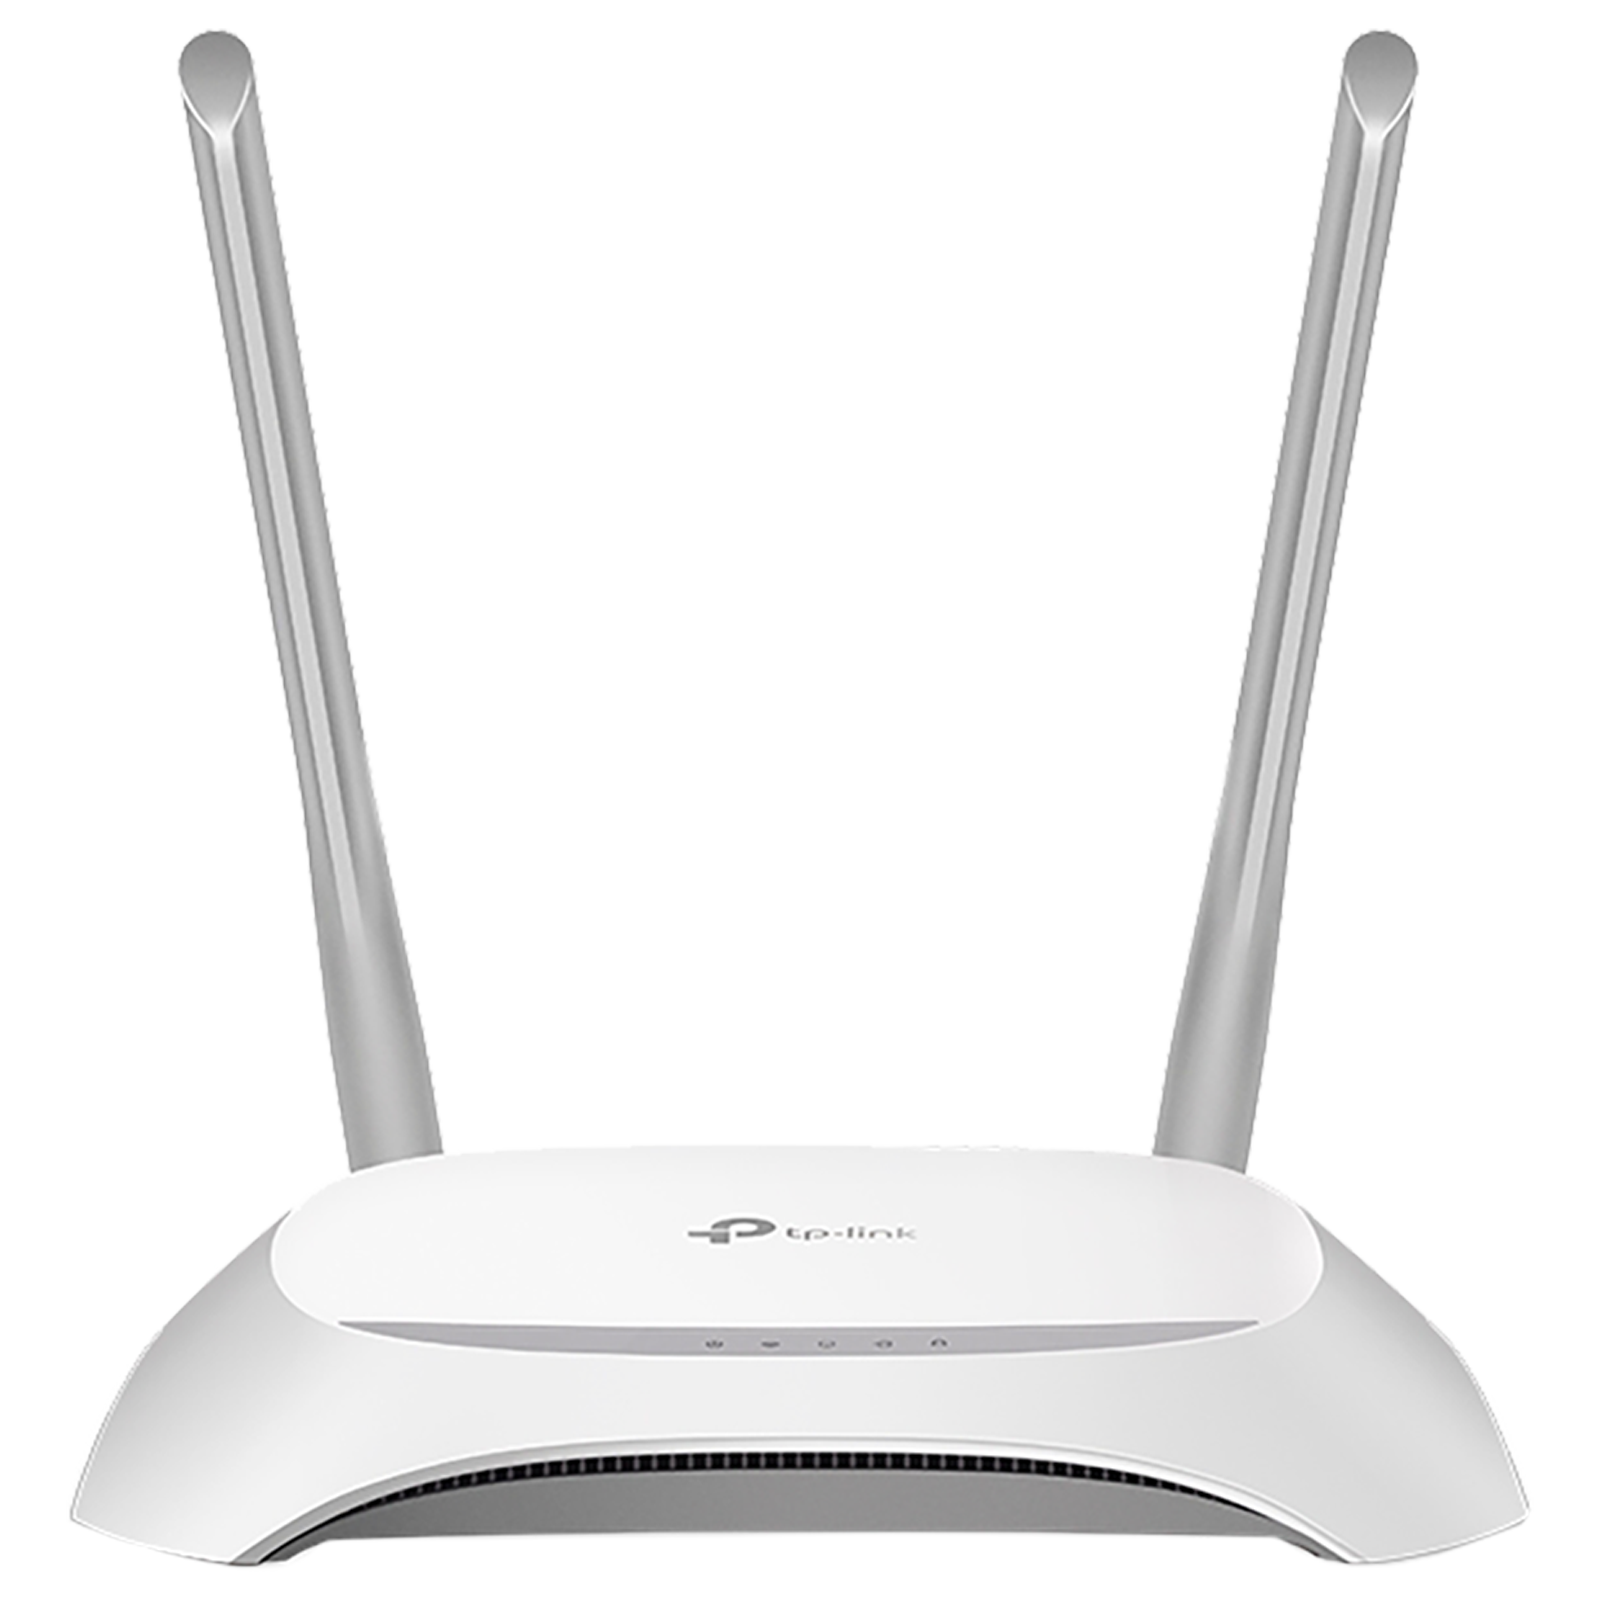 TPLINK Wireless Router 850N 300 Mbps Wireless Router  (White, Single Band)